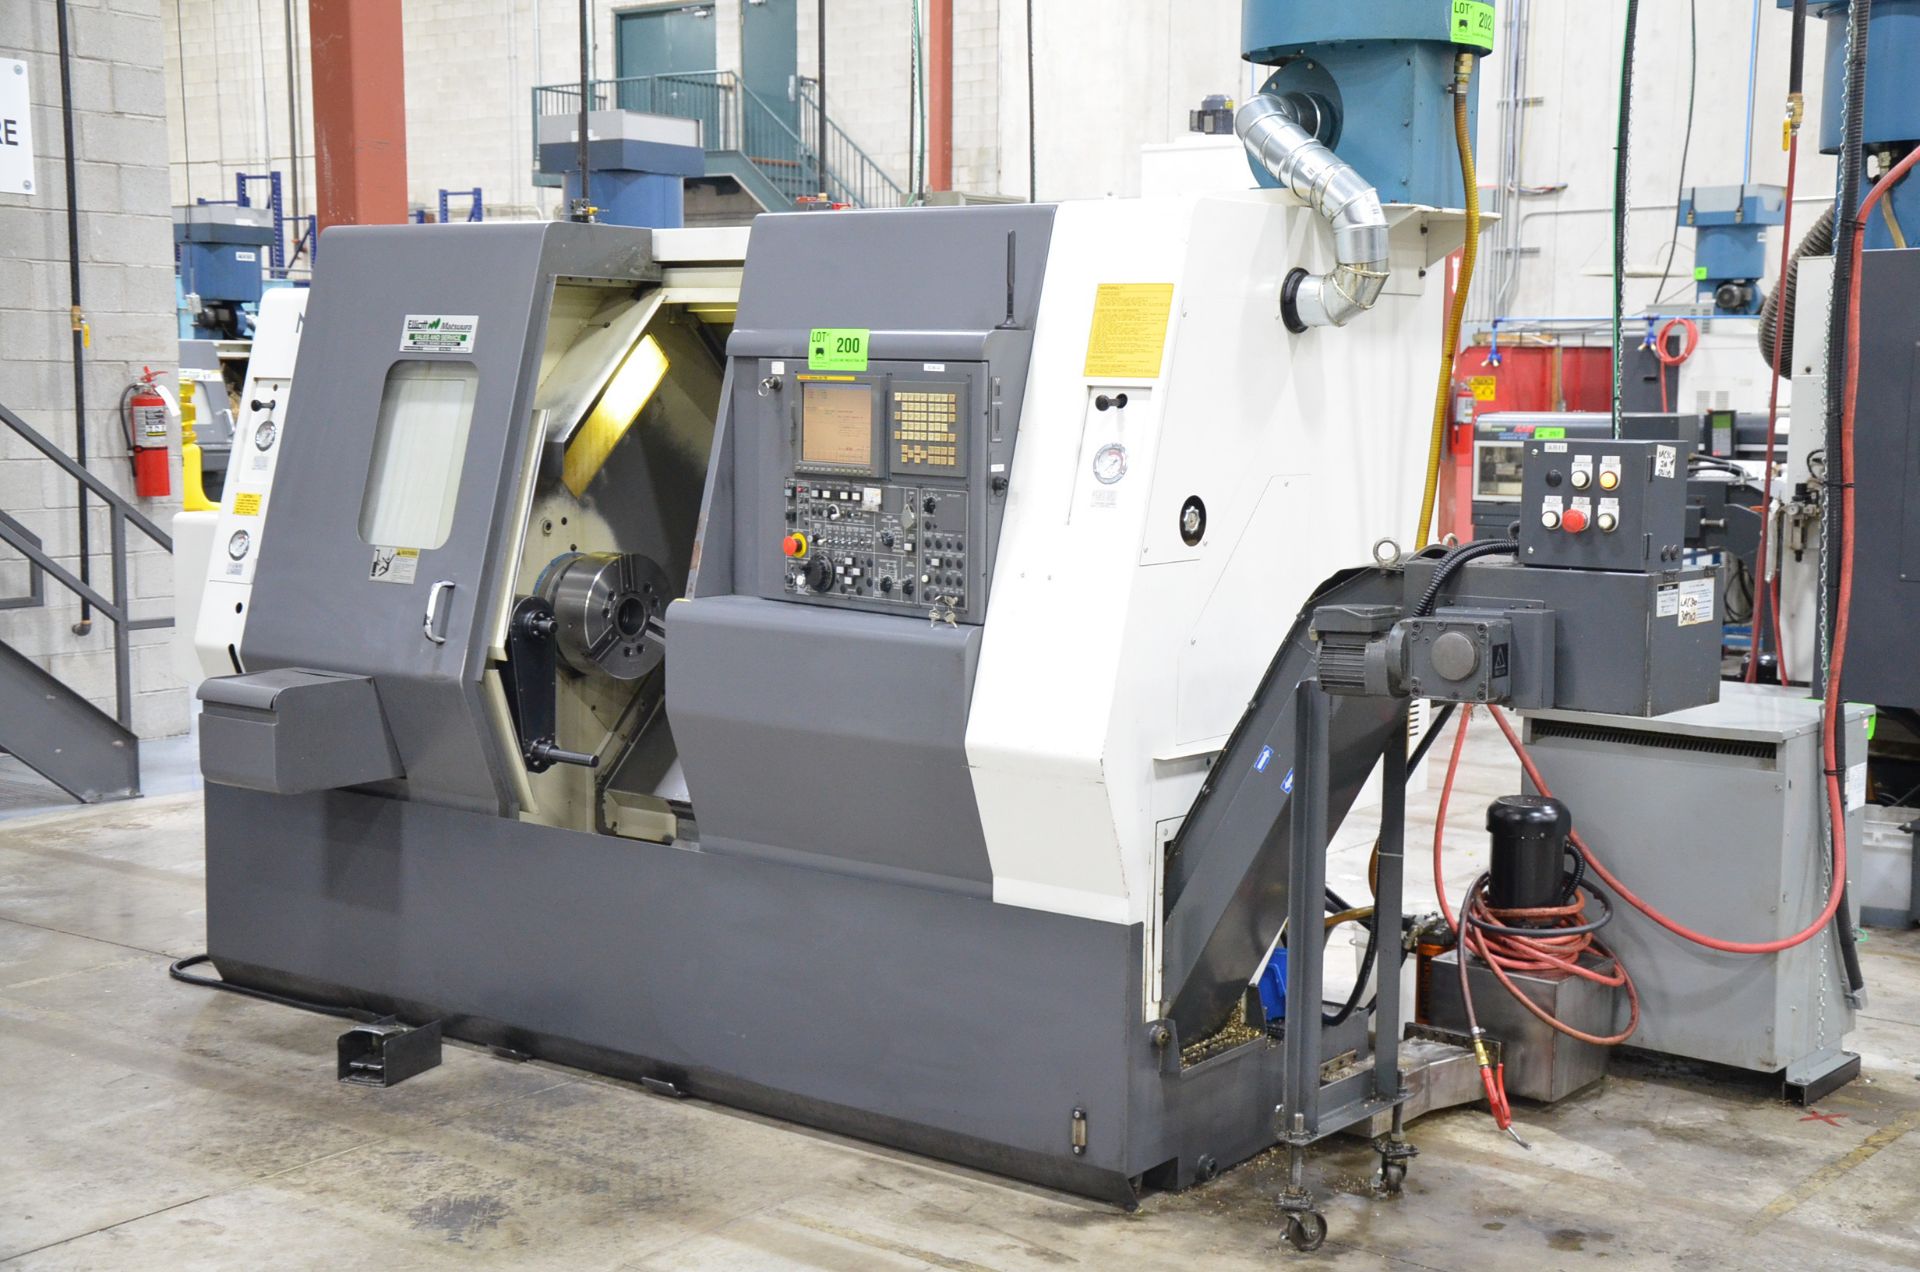 NAKAMURA-TOME SC300 CNC TURNING AND LIVE MILLING CENTER WITH FANUC 21I-TB CNC CONTROL, 22.04" SWING, - Image 2 of 16